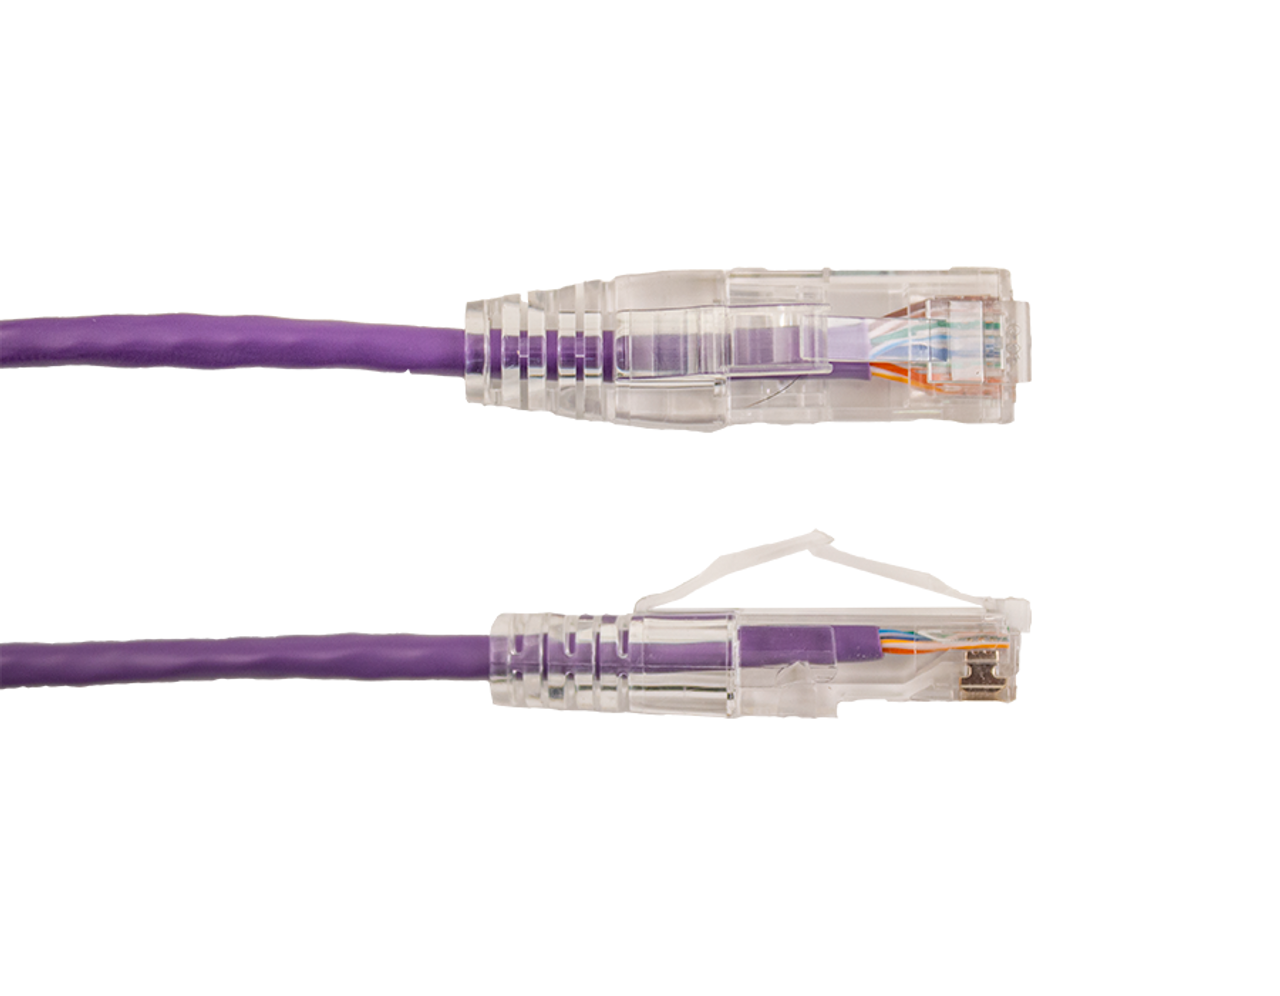 Category-6A Slim Type Mold-Injection-Snagless Patch Cord, 25FT, 28AWG Stranded, PVC Jacket, Purple.